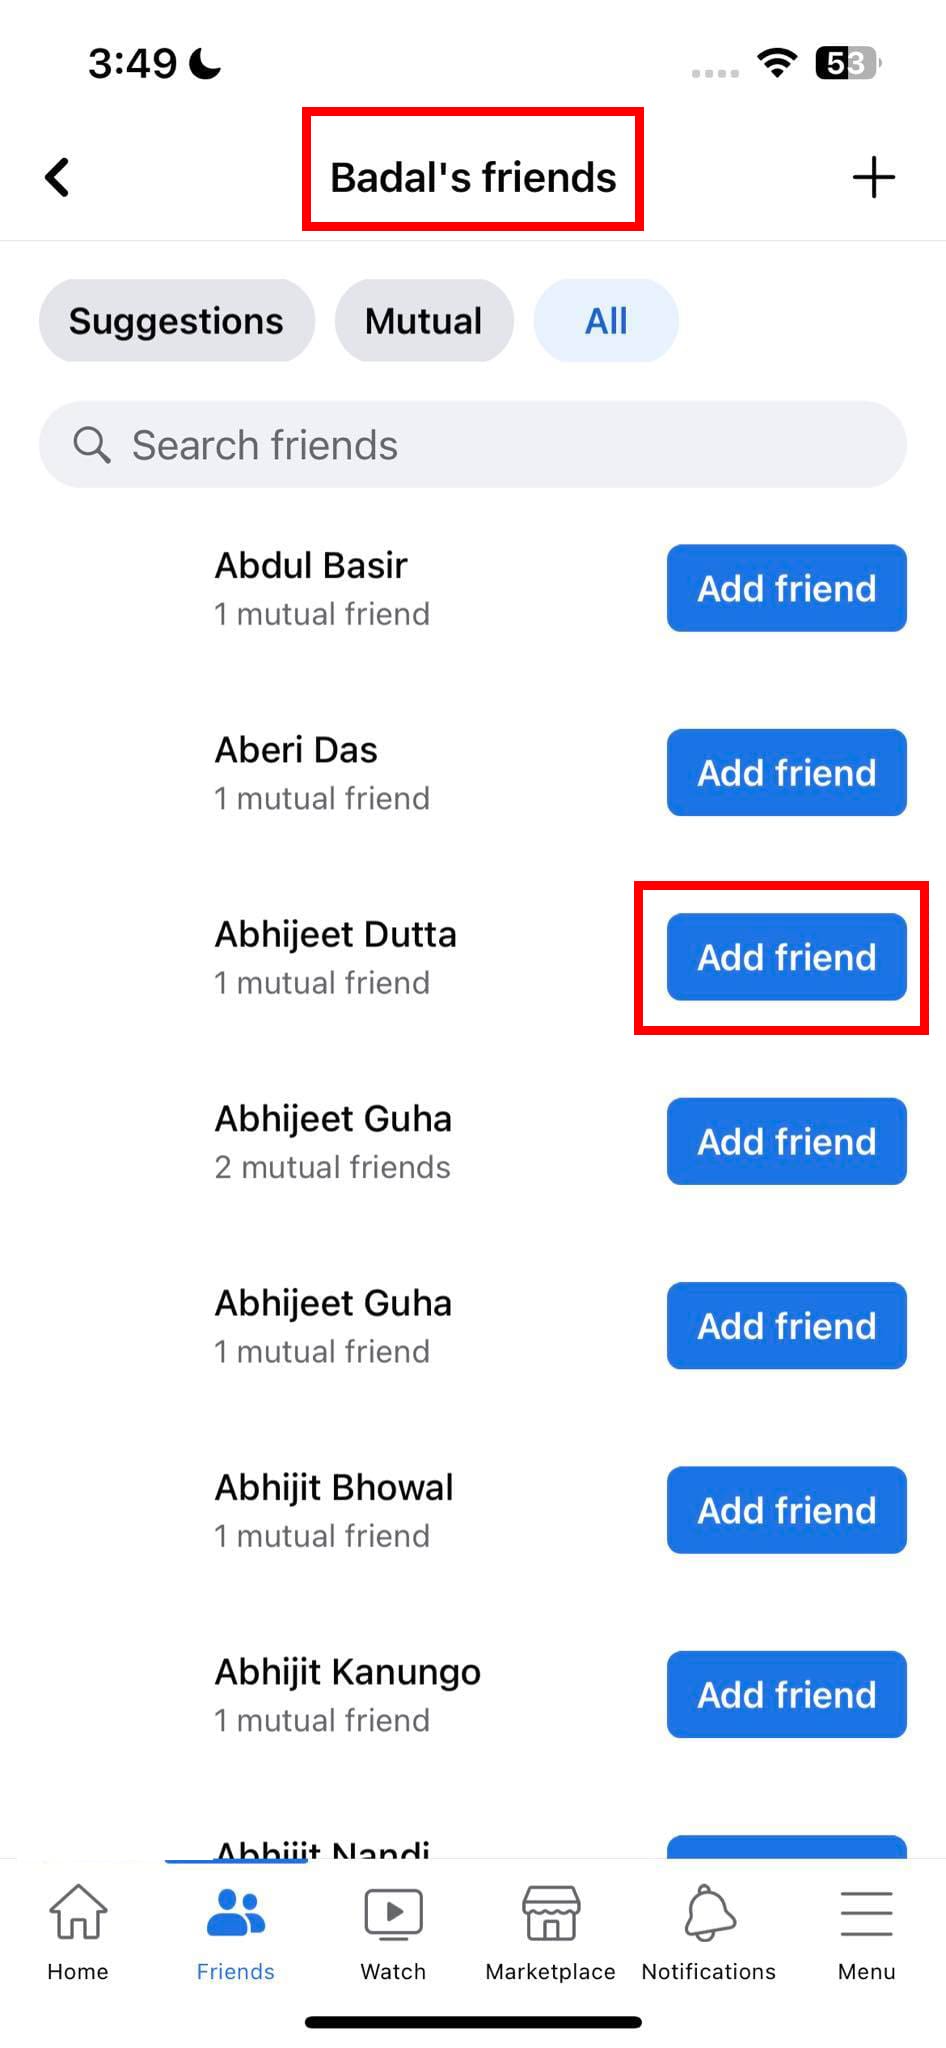 Add a mutual friend to get the Add Friend for a target Facebook profile